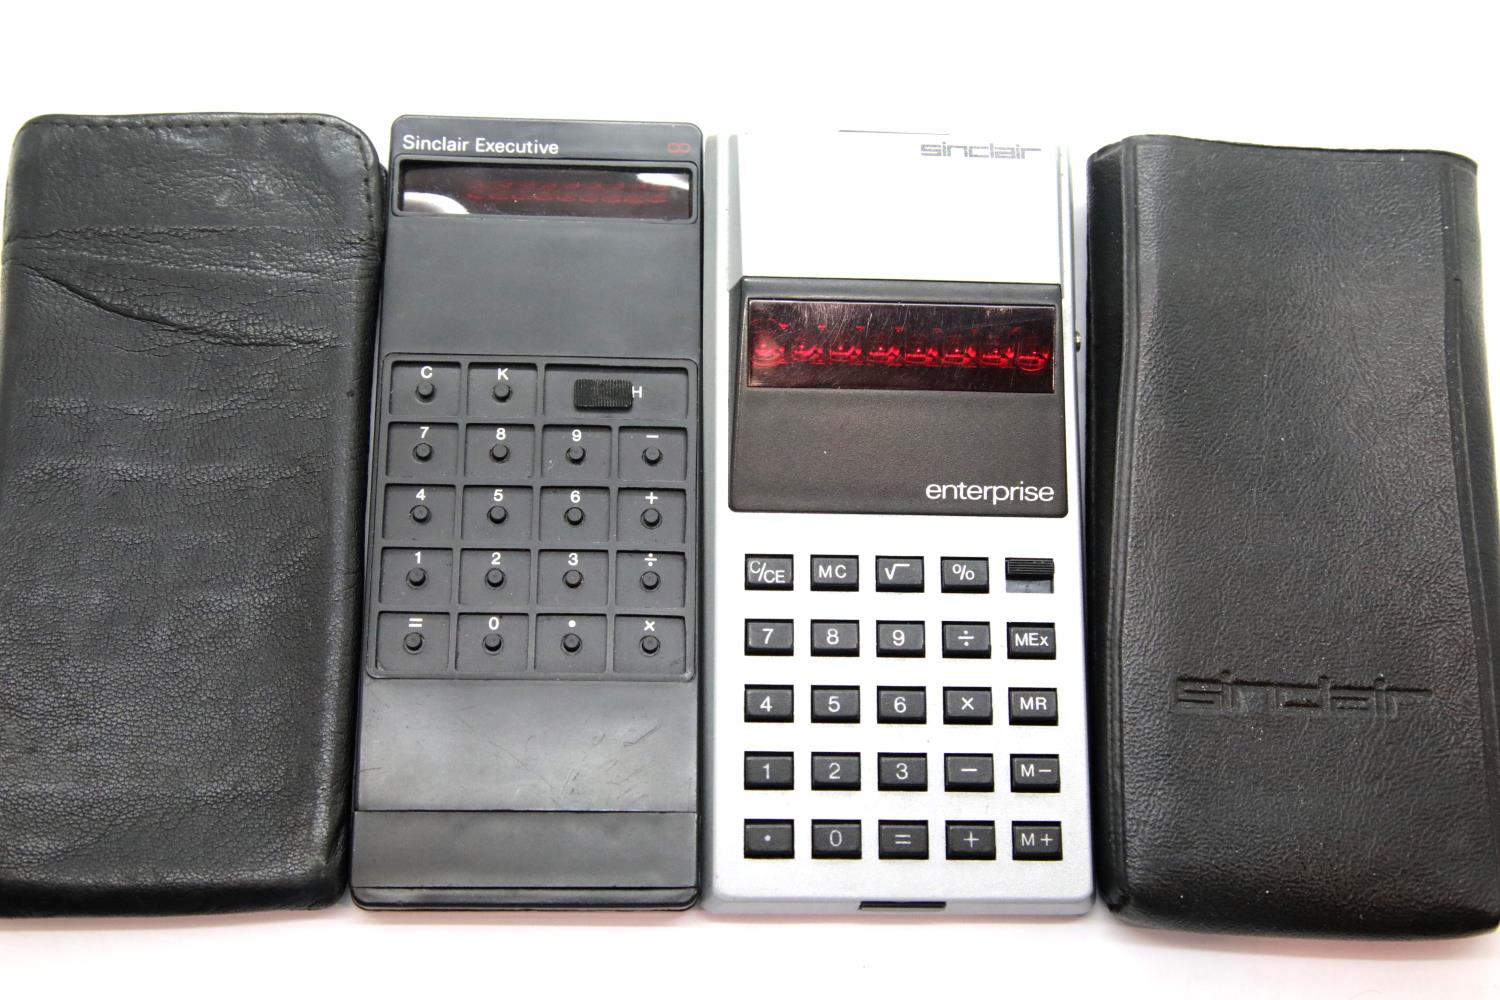 2x Sinclair Calculators including an Enterprise in silver and an Executive, both in slip cases. P&